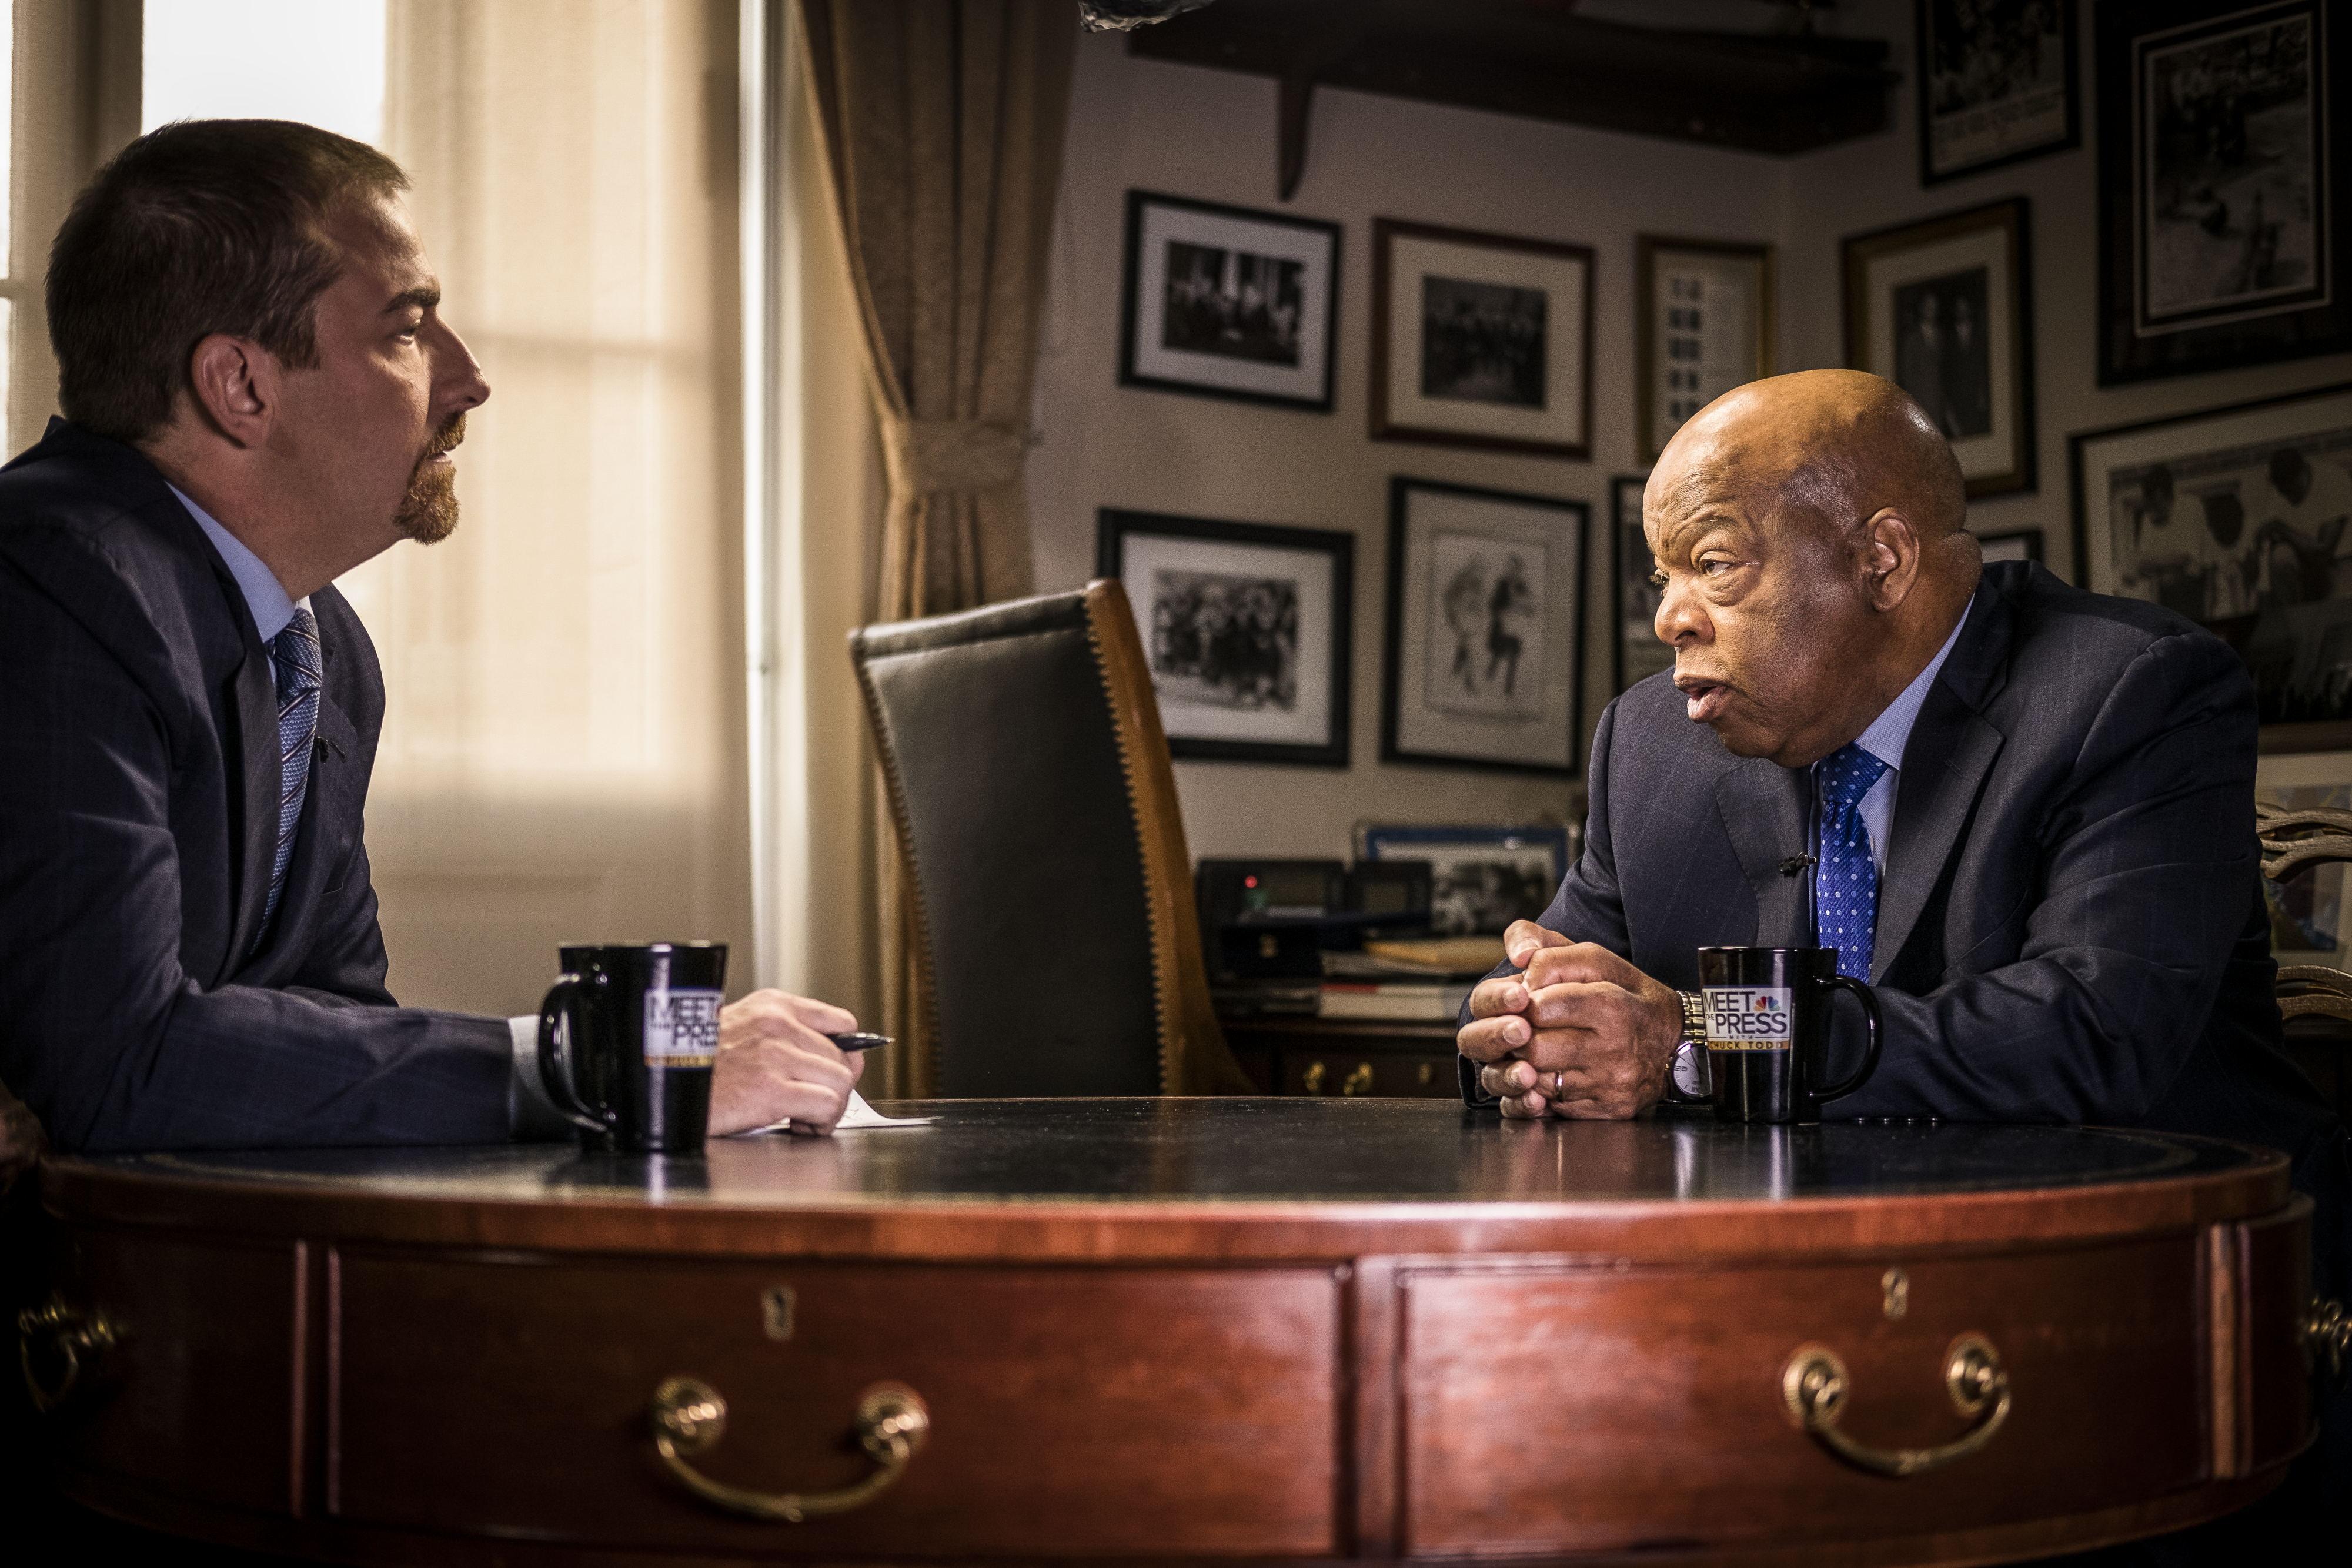 John Lewis on Donald Trump: ‘Almost impossible for me to work with him’